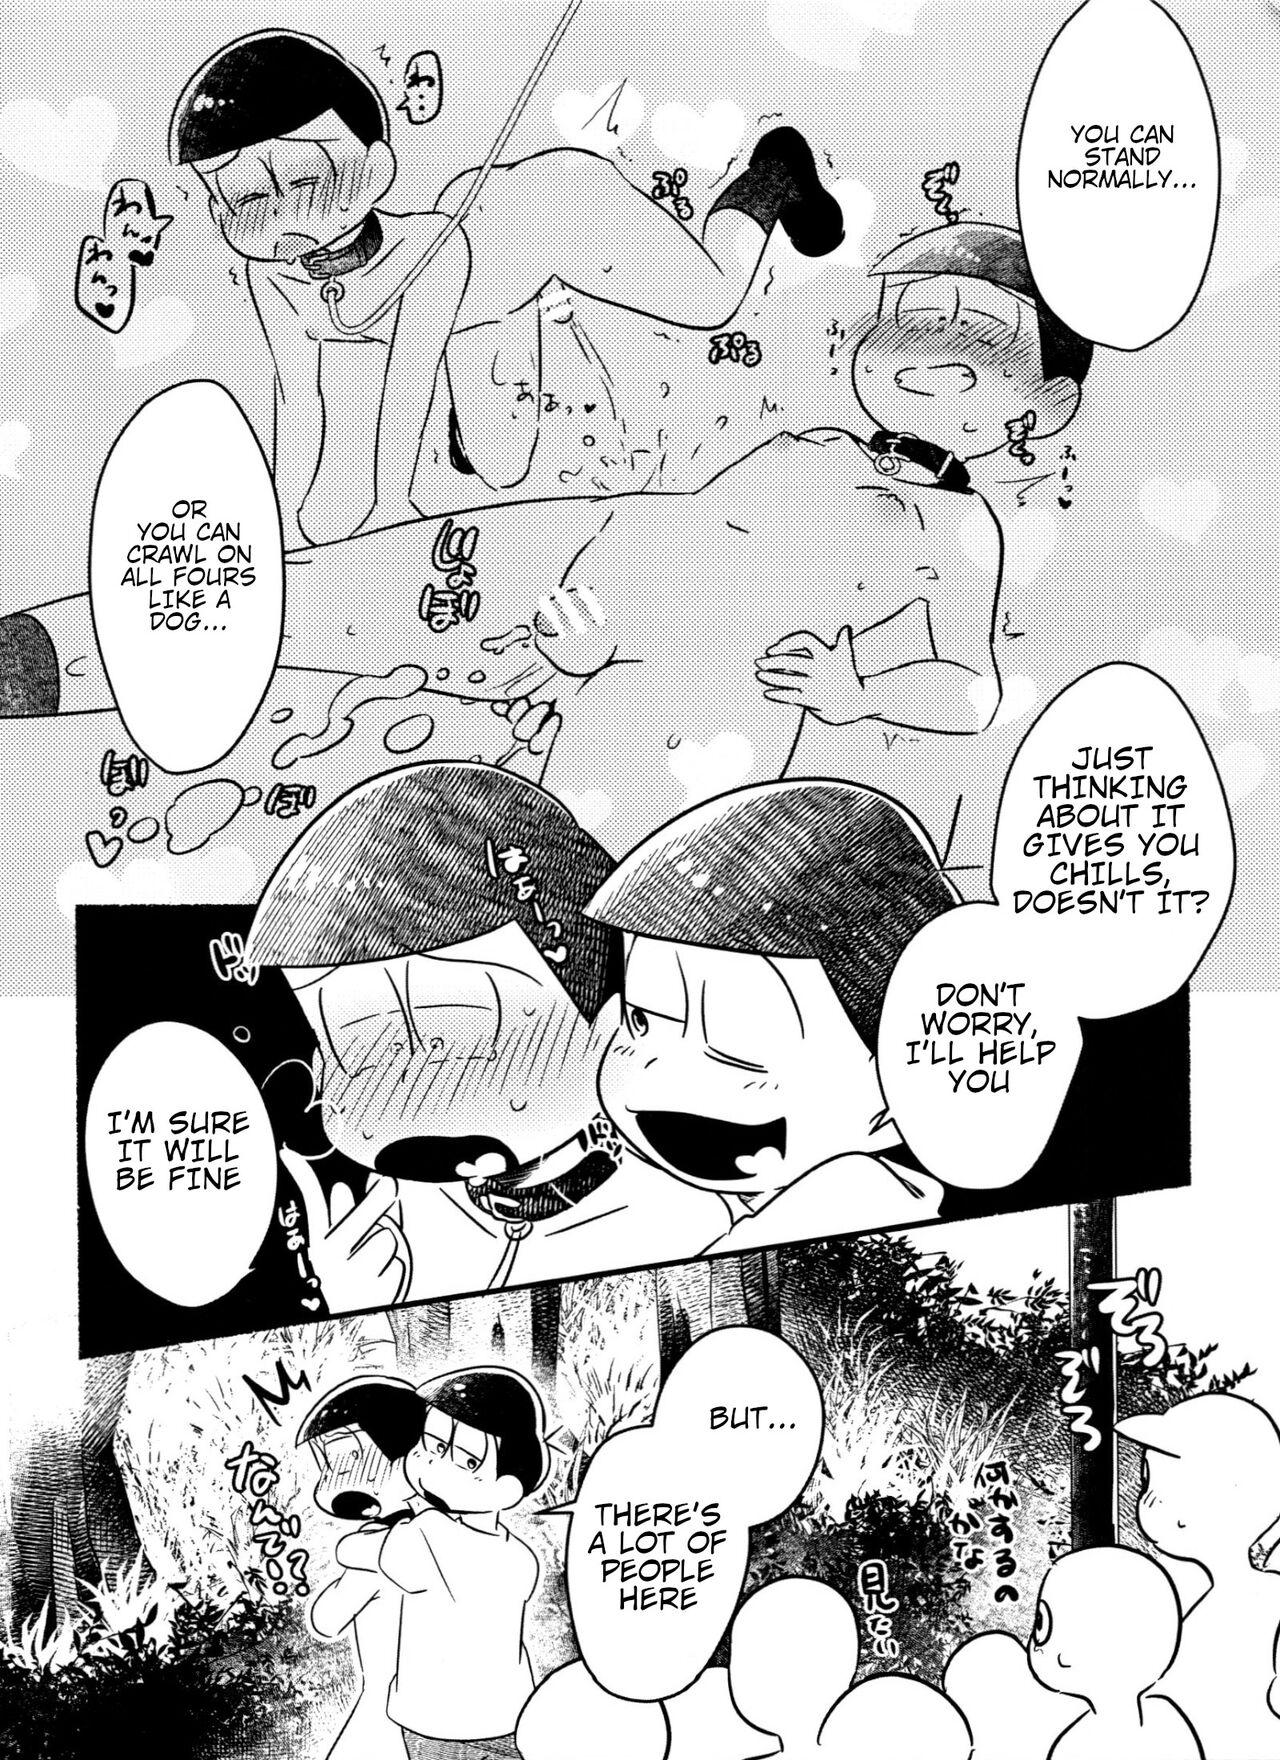 Adult Inspector Choromatsu walks naked at night and does XXX in the public eye R18 book - Osomatsu san Seduction Porn - Page 13